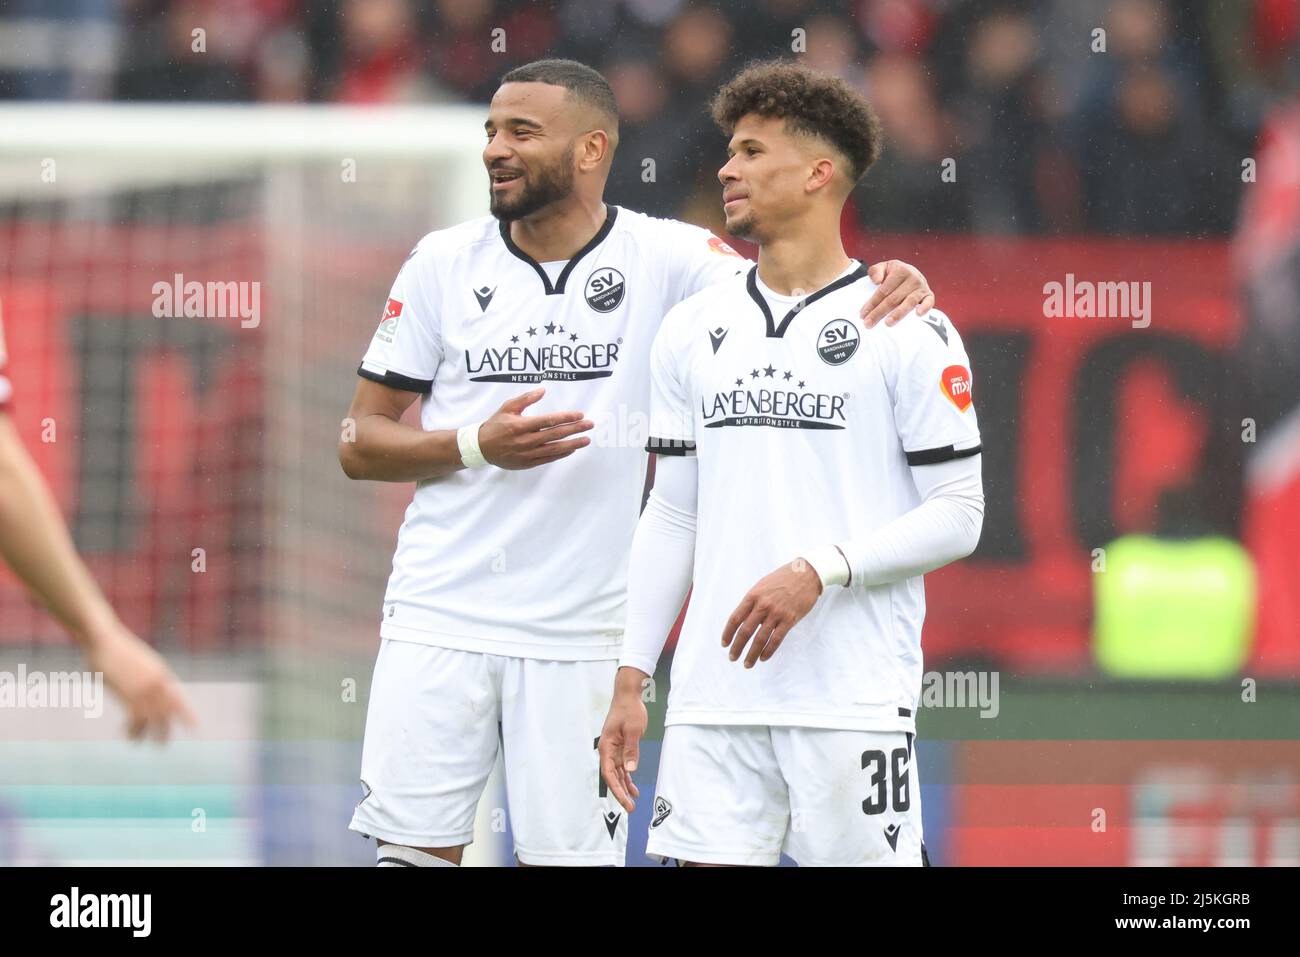 Nuremberg, Germany. 24th Apr, 2022. Soccer: 2nd Bundesliga, 1. FC Nürnberg - SV Sandhausen, Matchday 31 at Max Morlock Stadium. Erik Zenga (l) and Chima Okoroji of SV Sandhausen celebrate their victory after the final whistle. Credit: Daniel Karmann/dpa - IMPORTANT NOTE: In accordance with the requirements of the DFL Deutsche Fußball Liga and the DFB Deutscher Fußball-Bund, it is prohibited to use or have used photographs taken in the stadium and/or of the match in the form of sequence pictures and/or video-like photo series./dpa/Alamy Live News Stock Photo